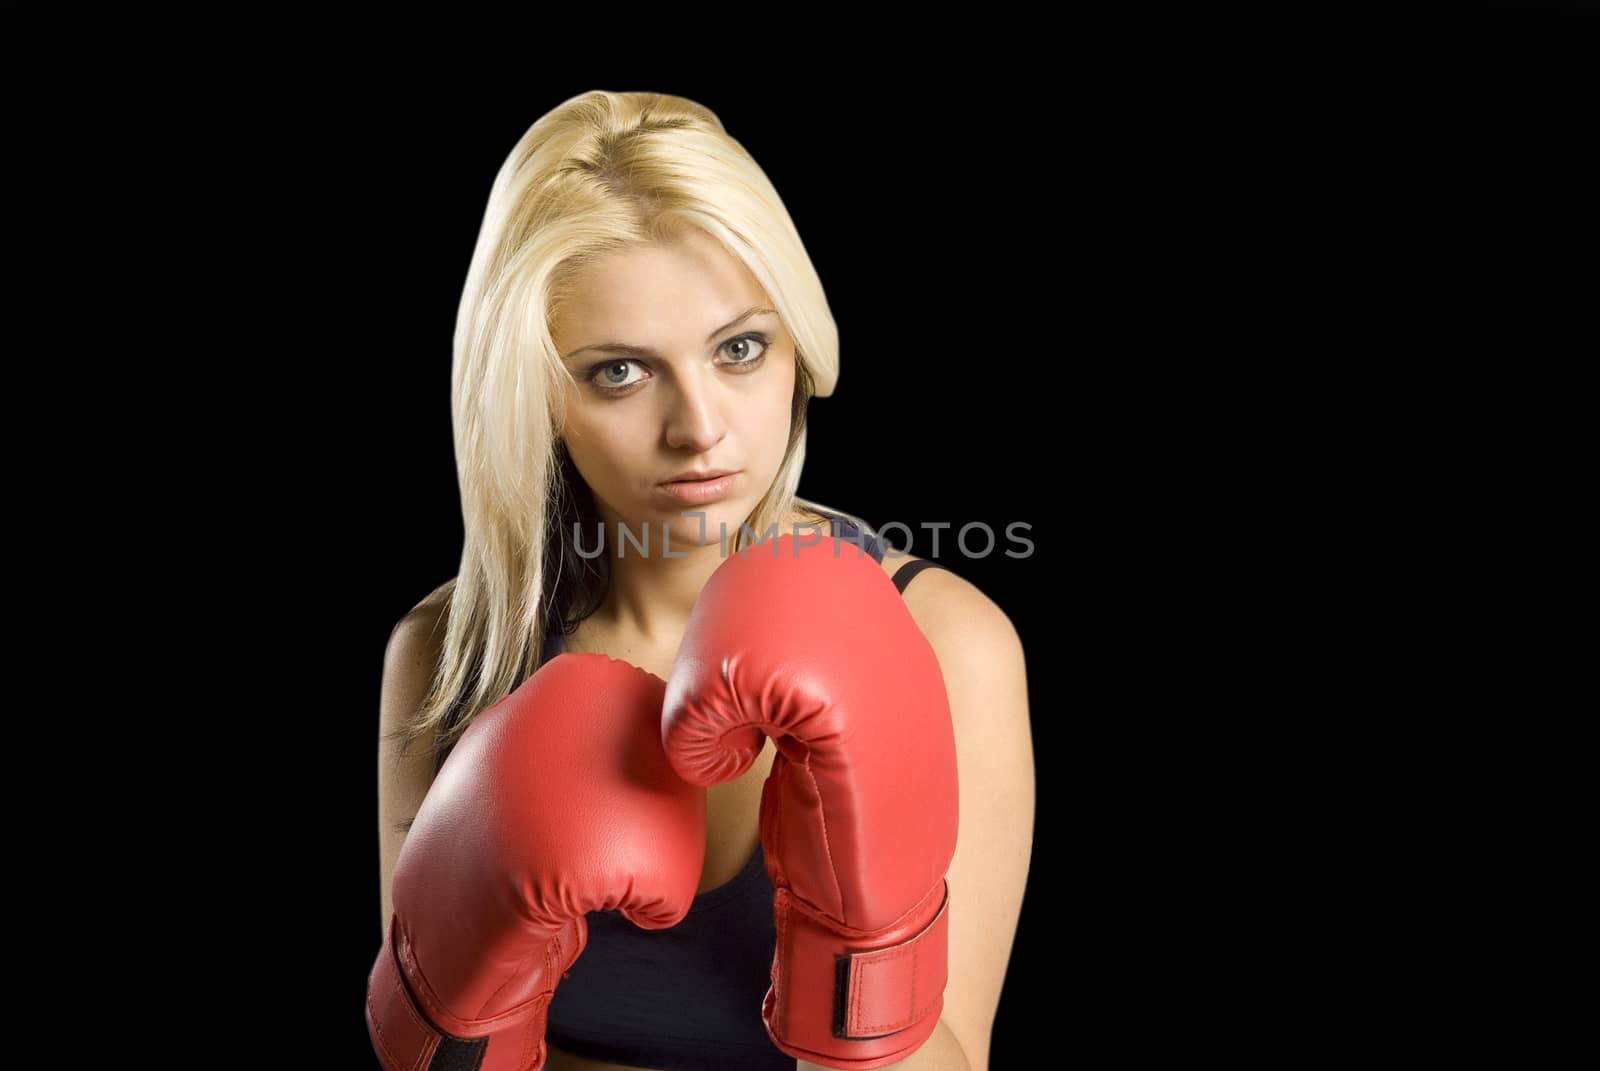 Beautiful young woman training with boxing gloves on blackboard background